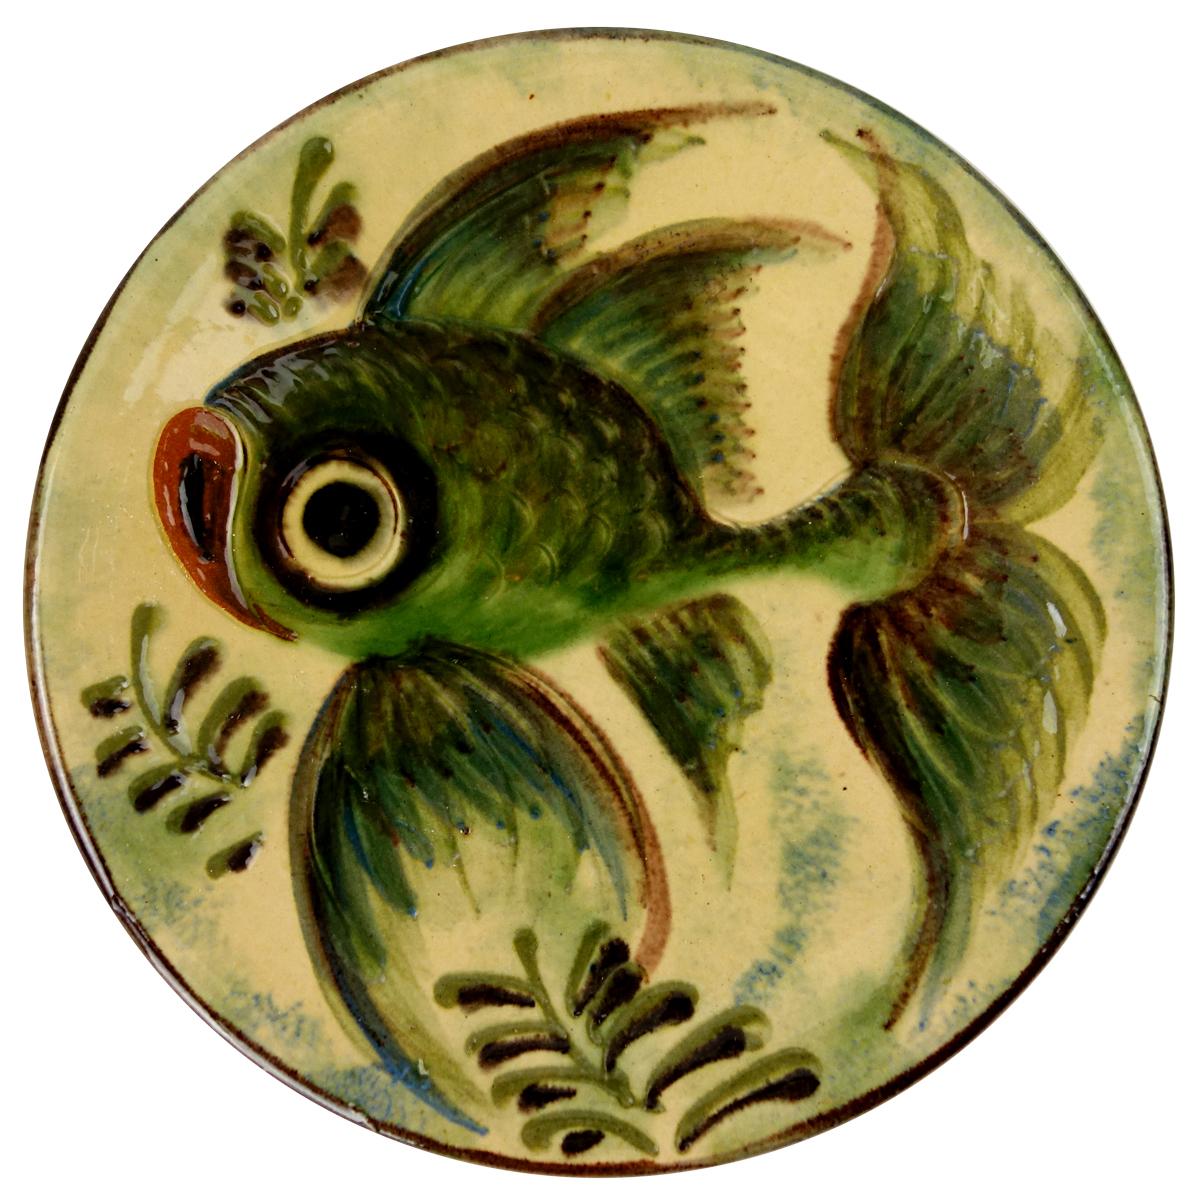 Mid-Century Modern Set of 4 Ceramic Wall Plates with Fish Decor Signed by Spanish Maker Puigdemont